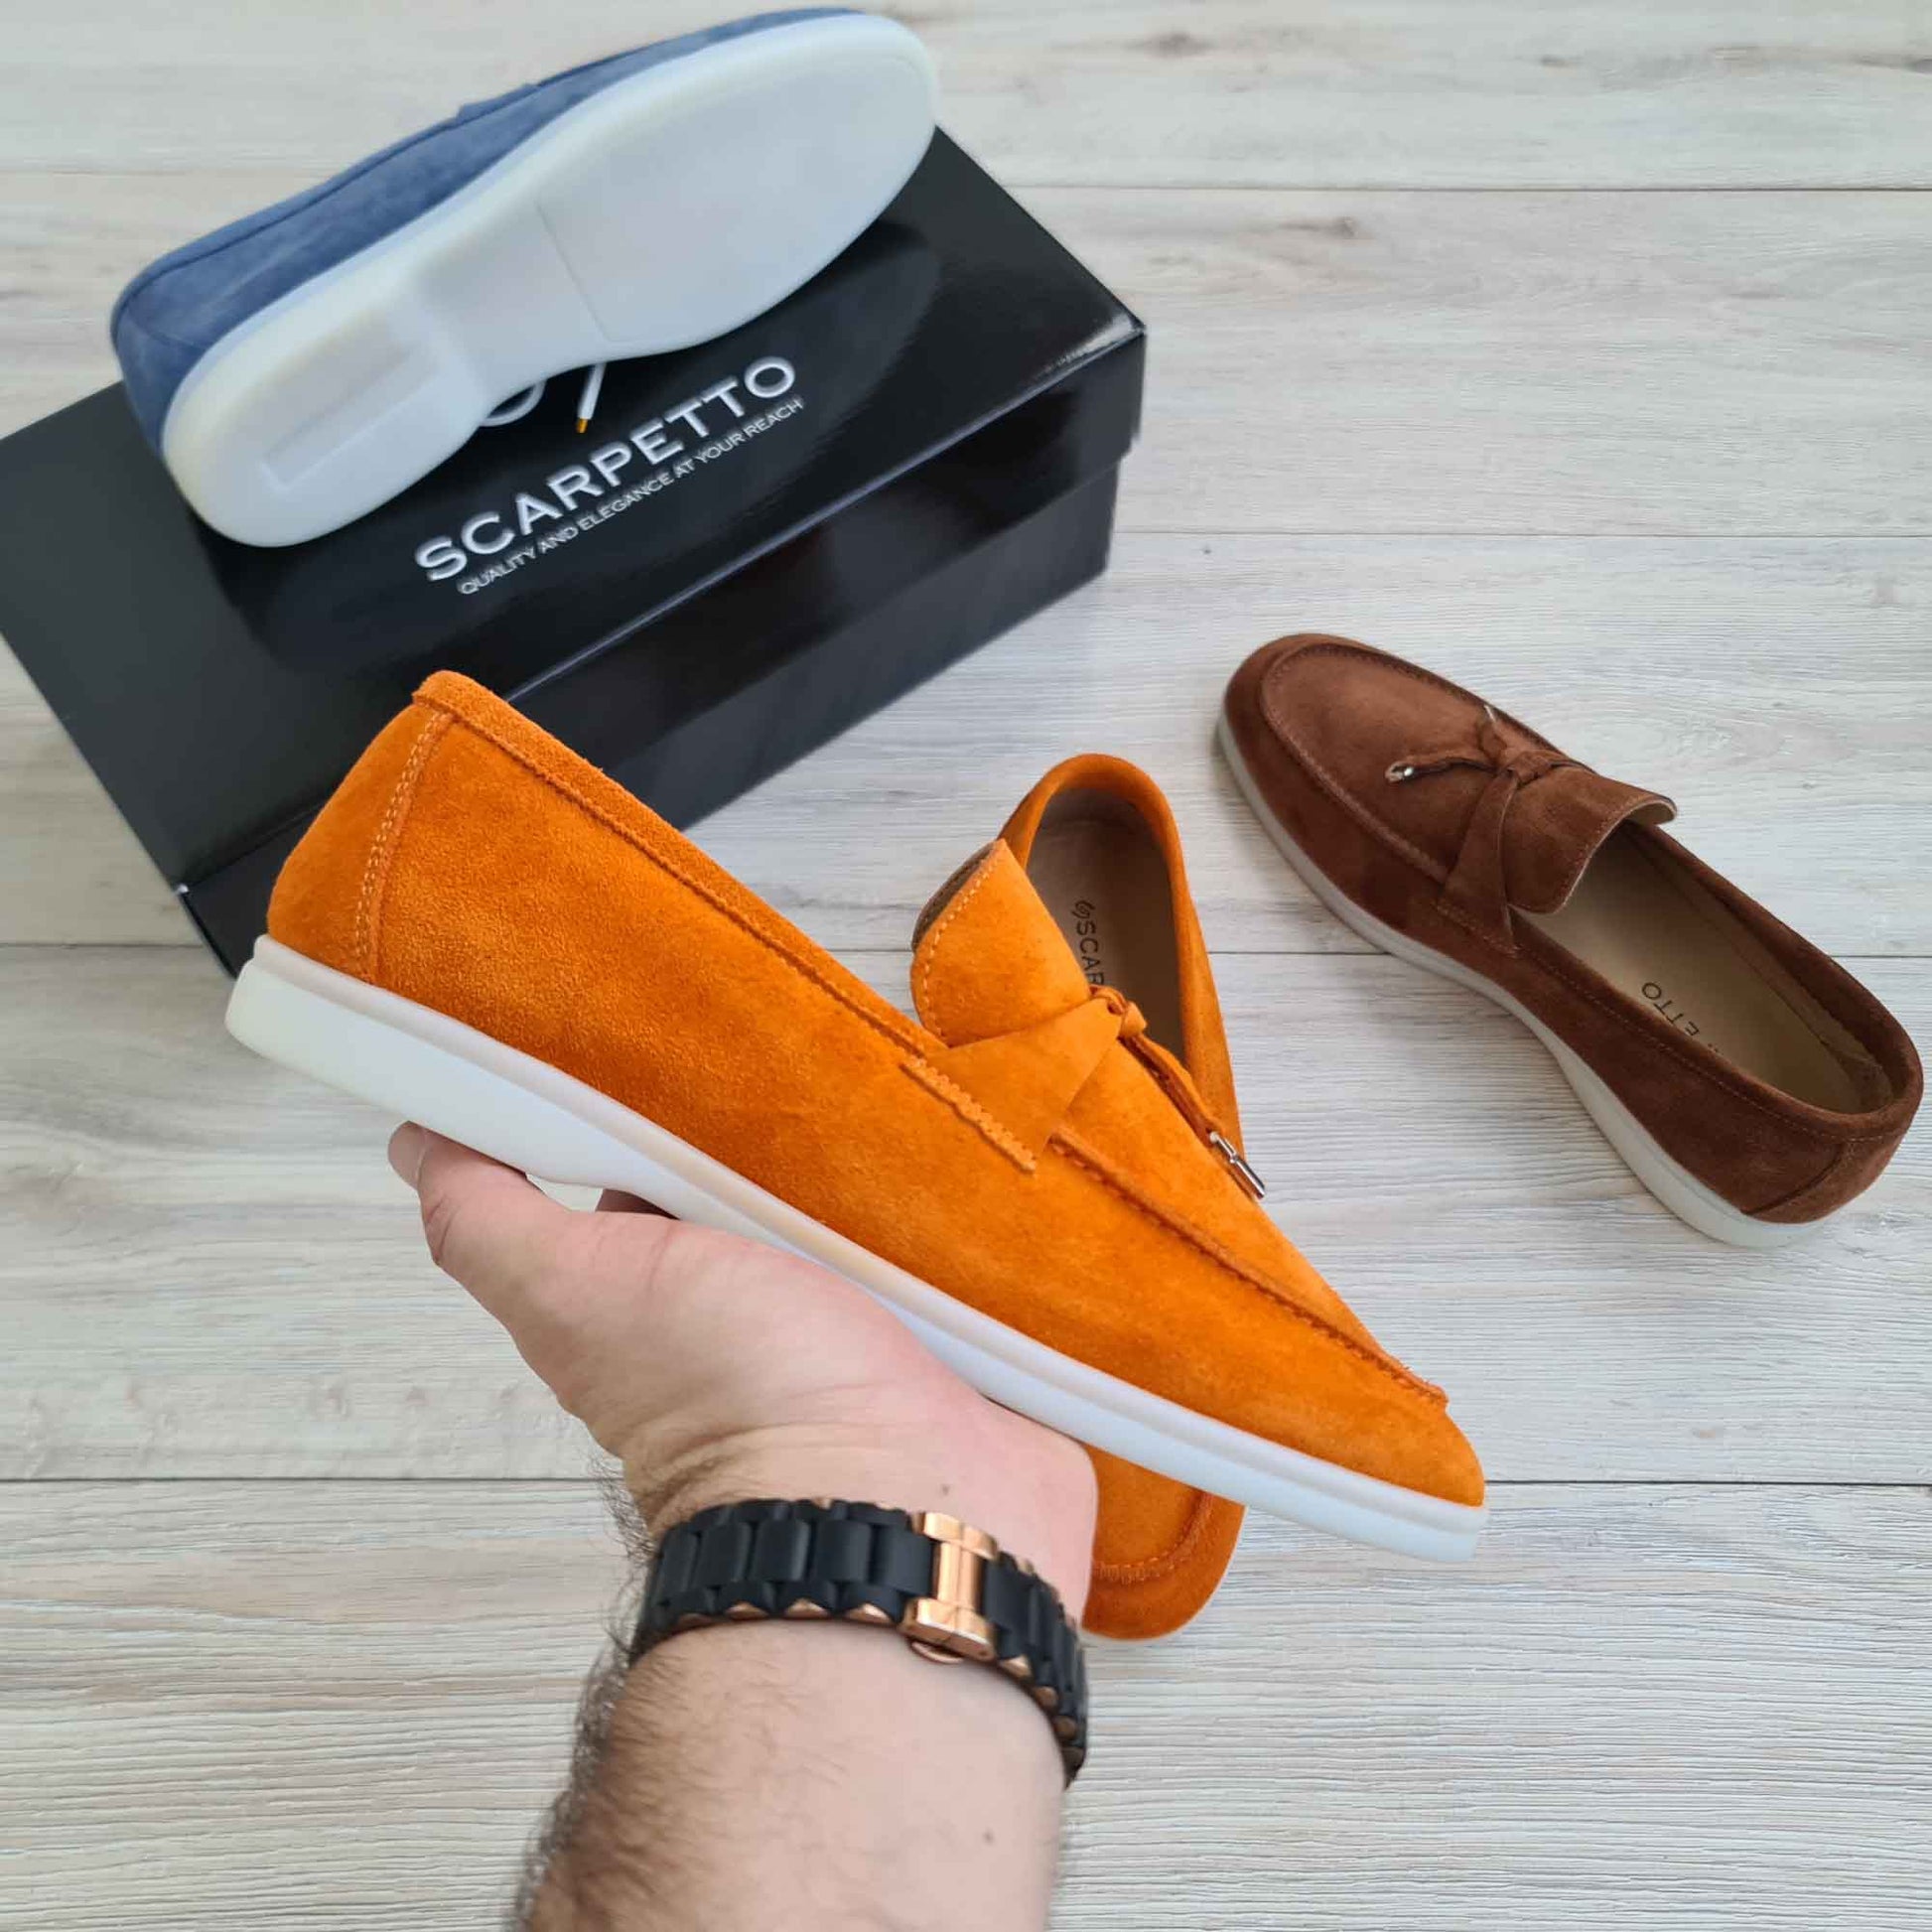 Men's Suede Leather Tassel Loafers - White Sole